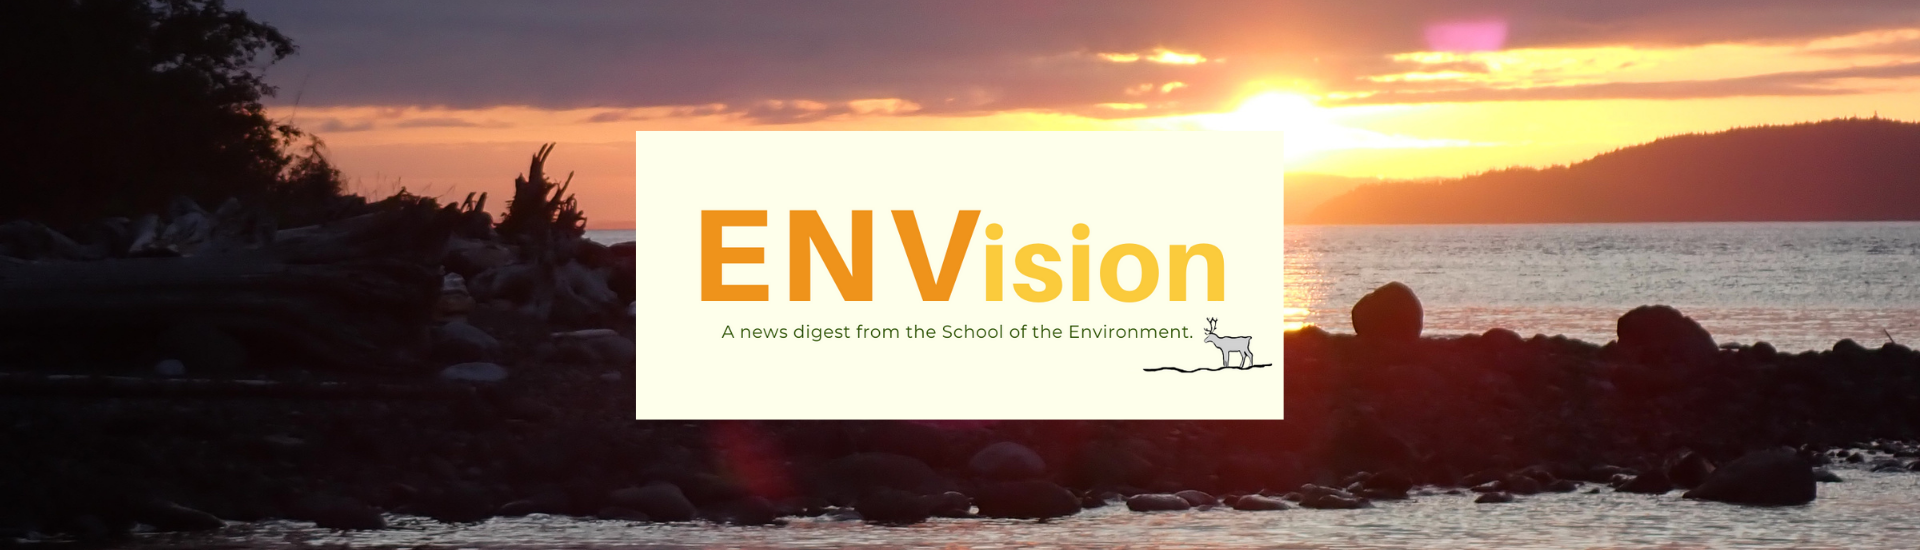 Envision a news digest from the School of the Environment